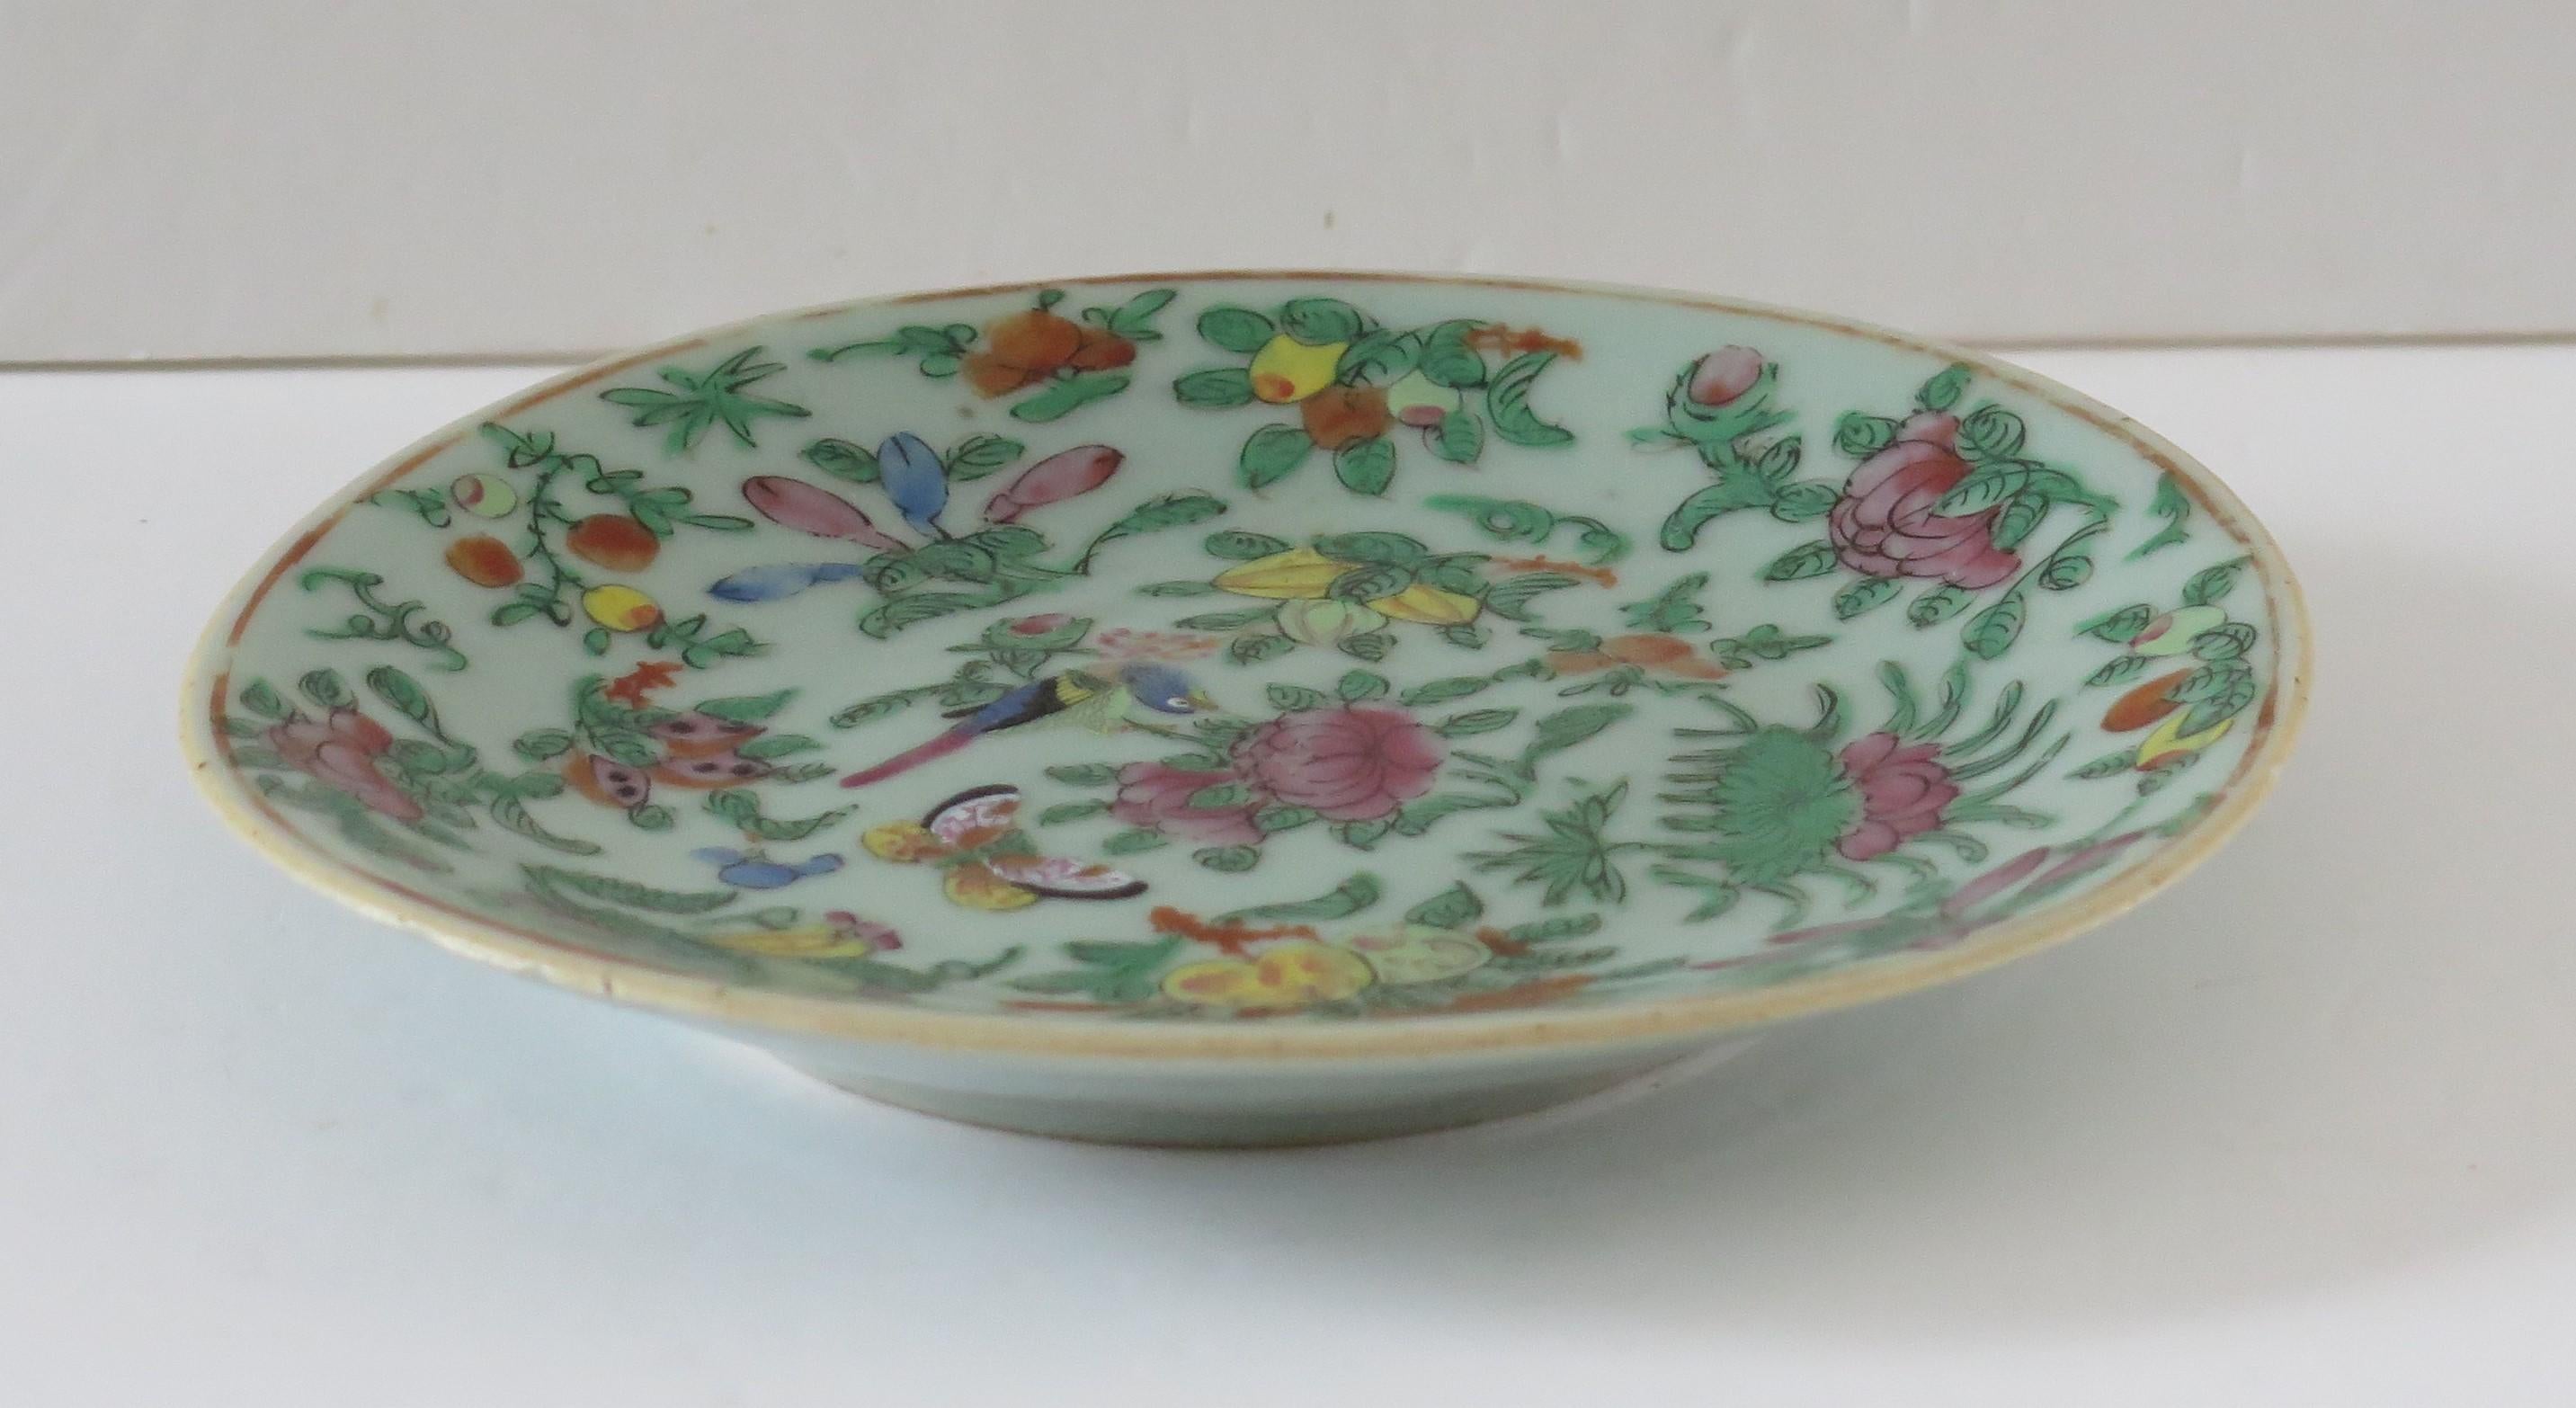 This is a very good 19th century Chinese Export, (Canton) deep plate or dish, which we date to the early 19th century, circa 1820 of the Qing dynasty.

The plate has a light green, Celadon ground glaze with beautifully hand painted decoration, in